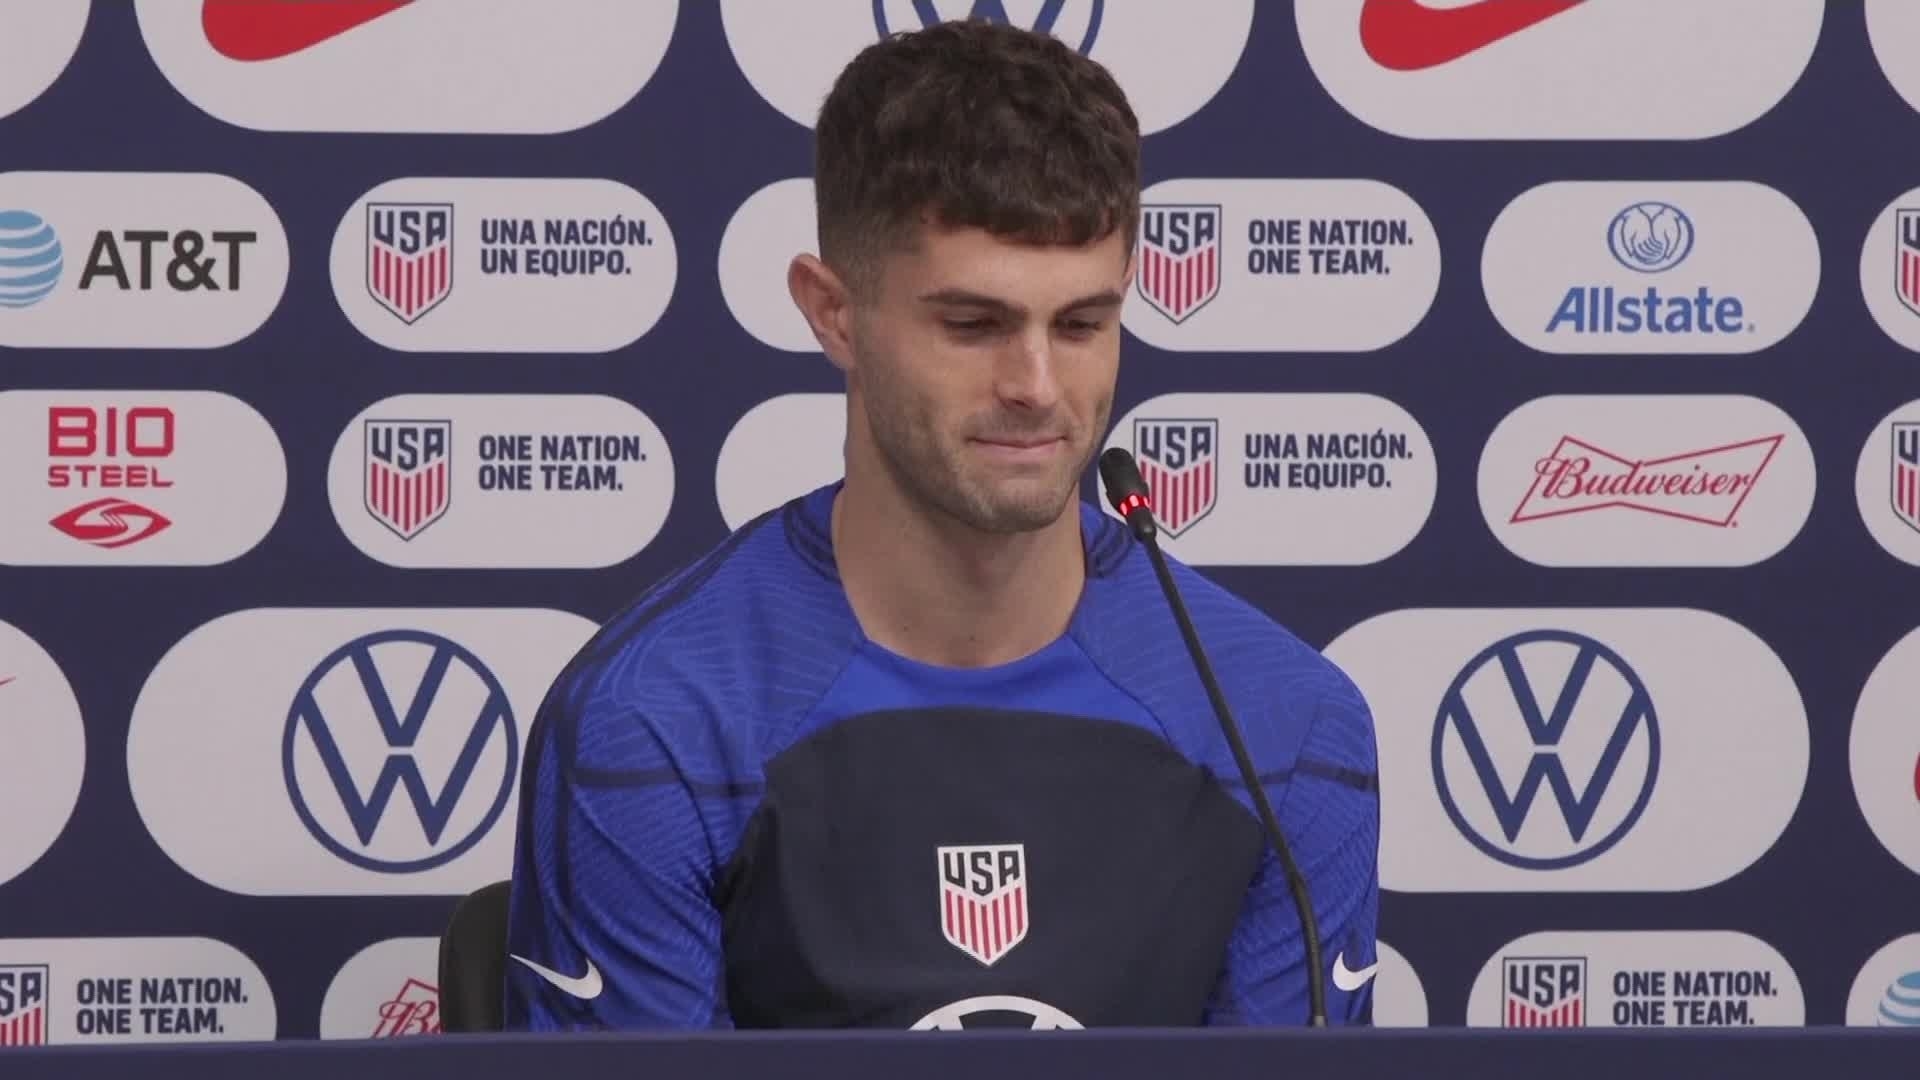 Press F to pay respect to Pulisic's testicles